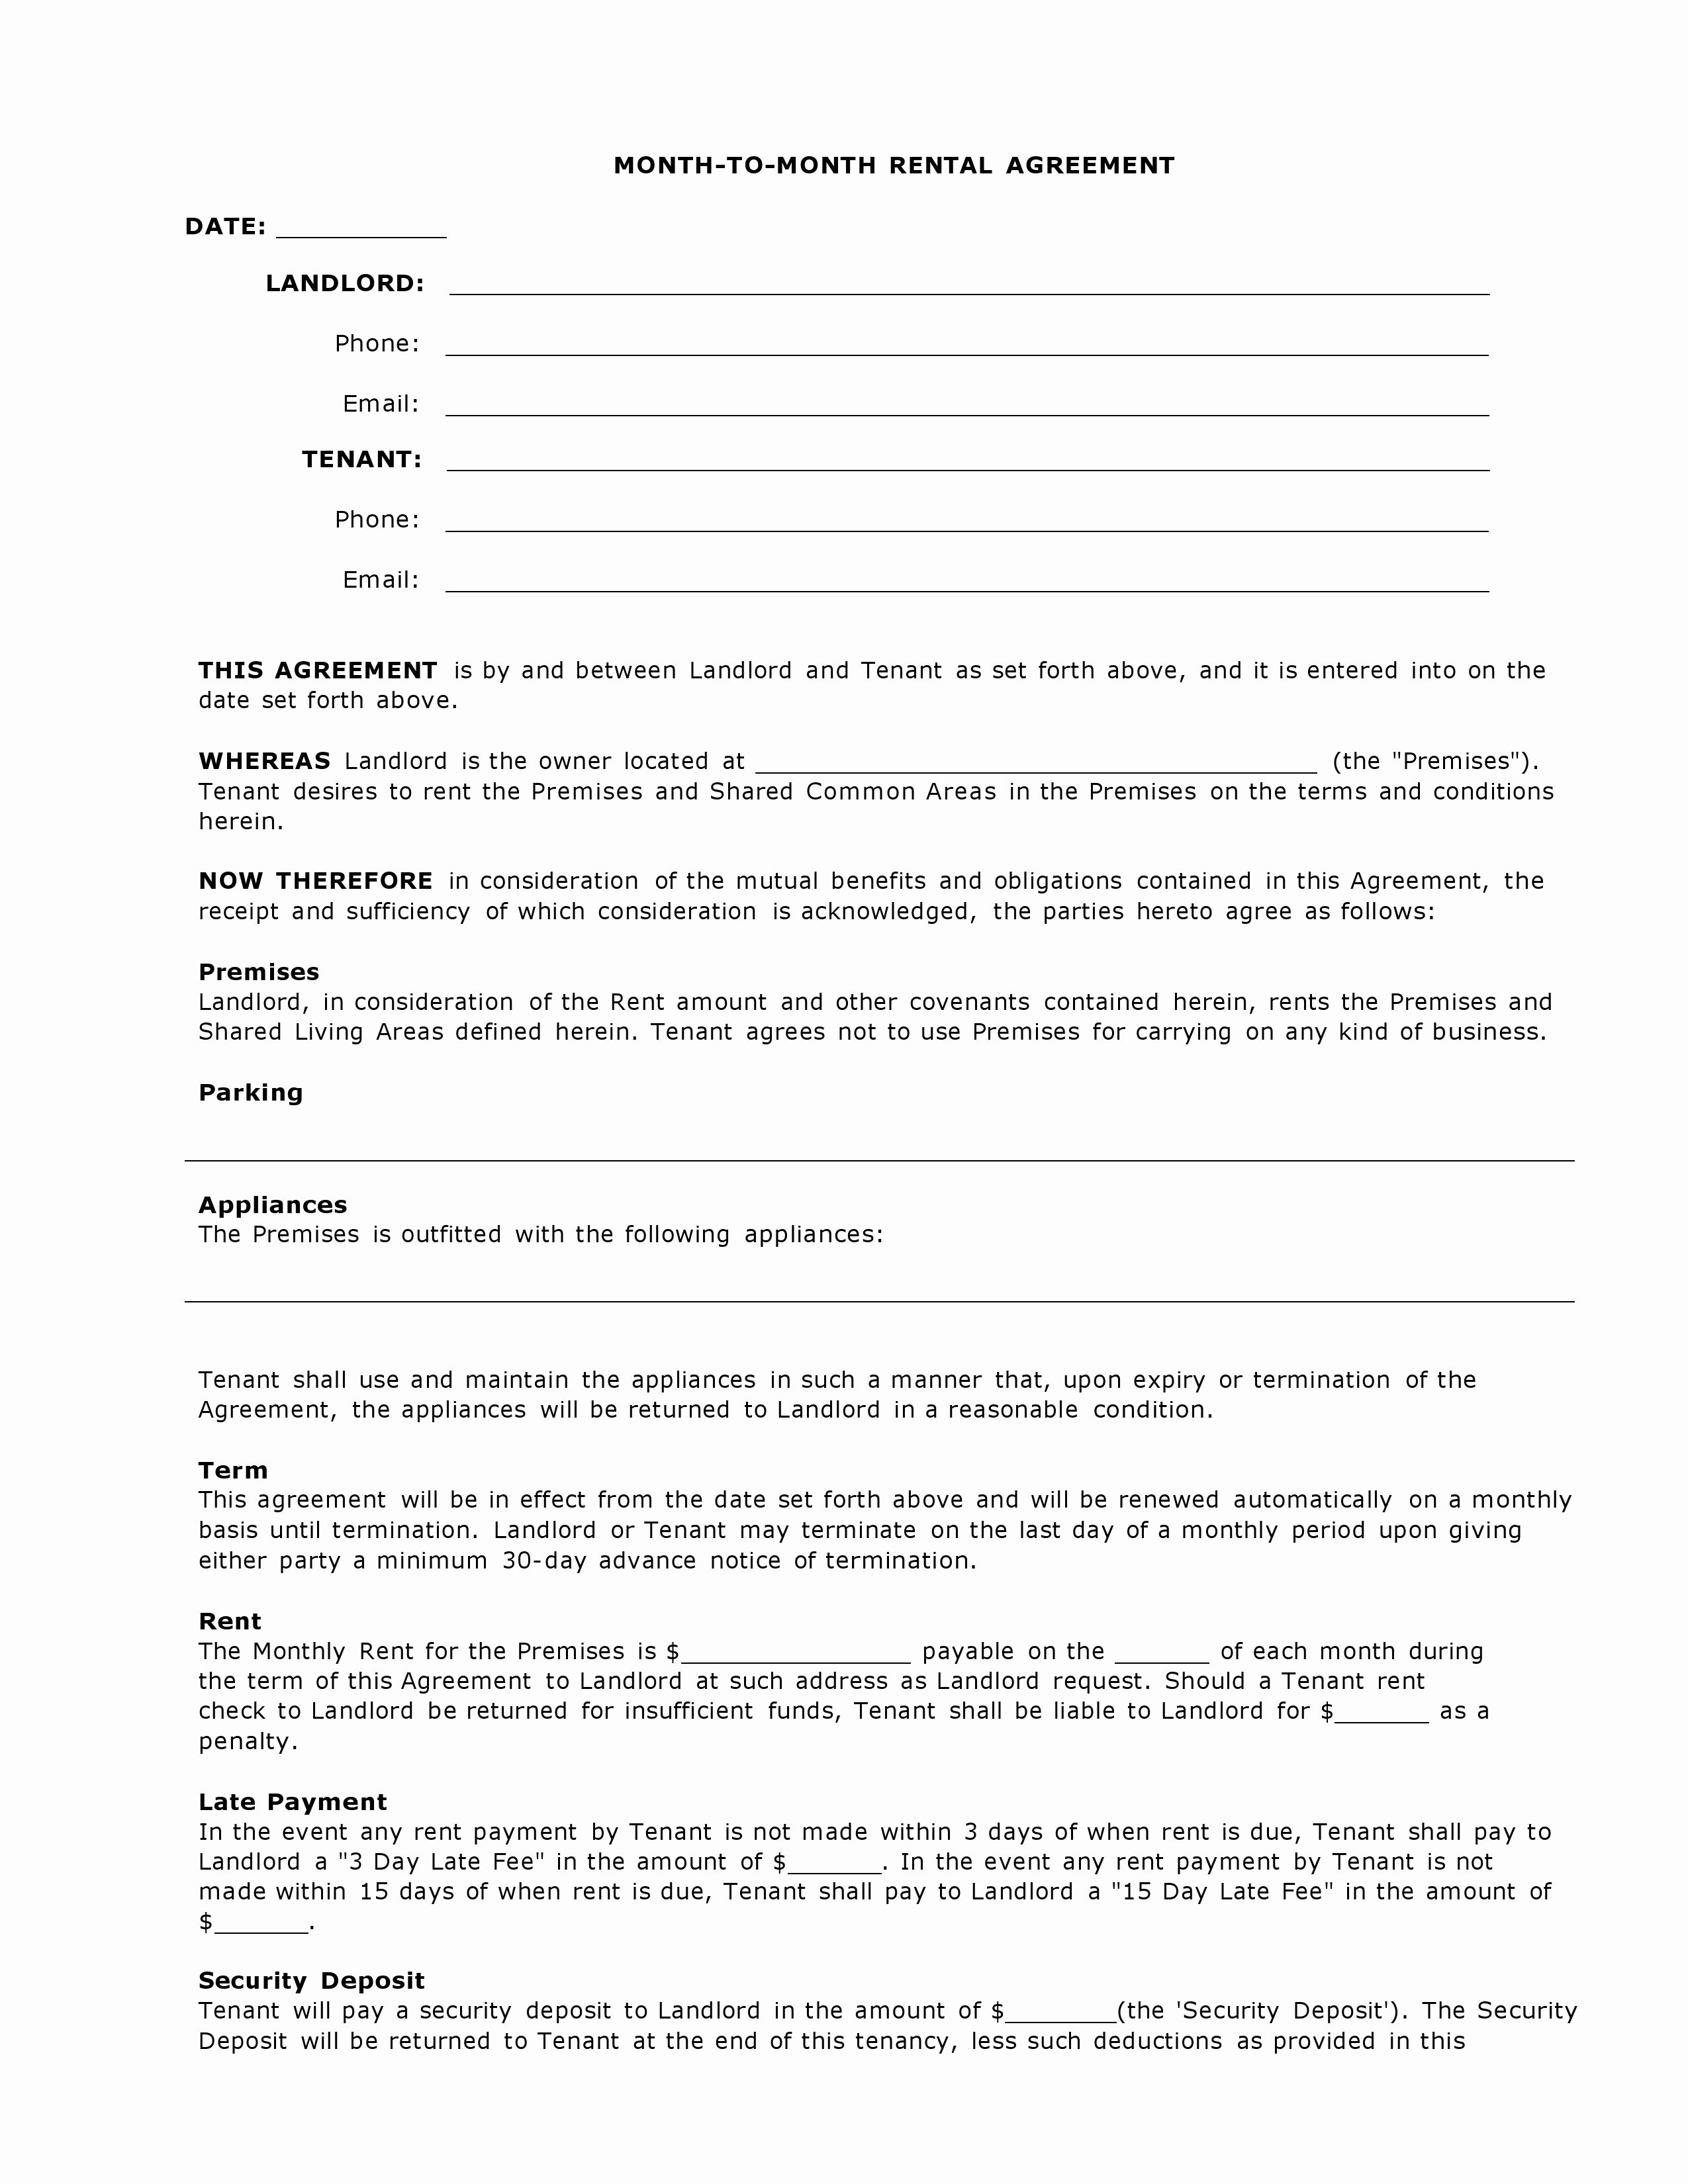 Free Rental Agreement Generic Template Awesome Collection